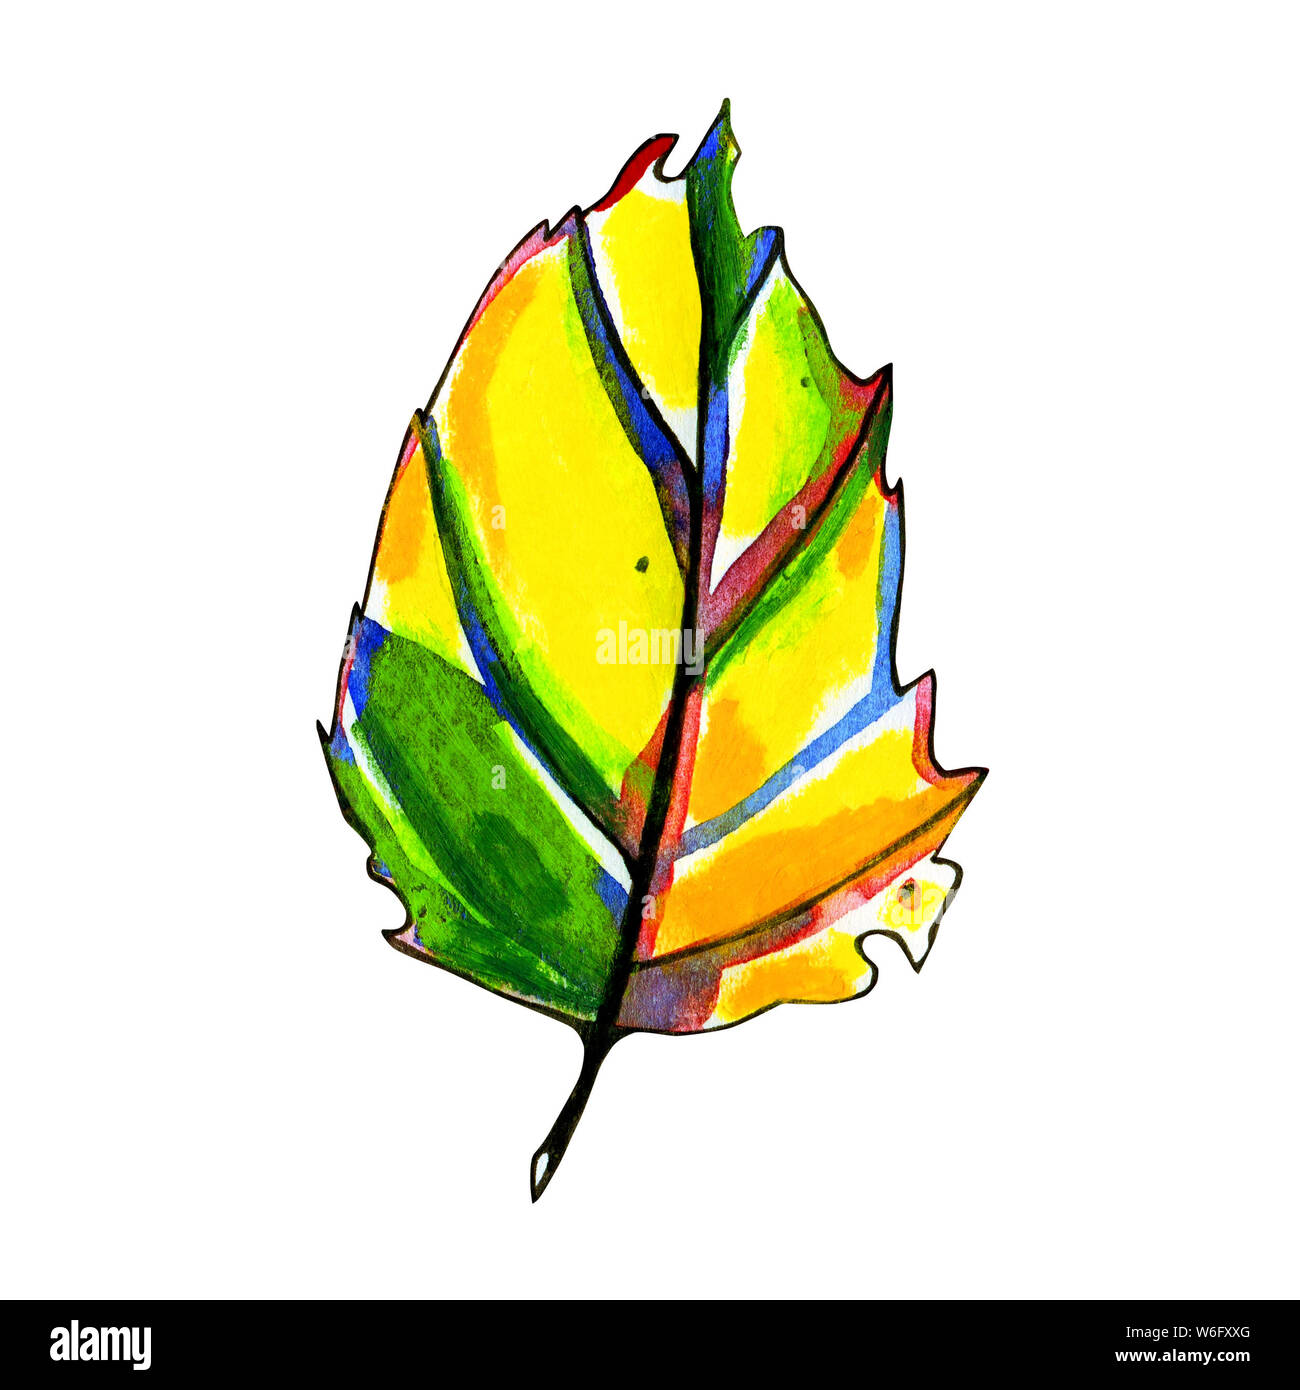 Watercolor stylized graphic autumn leaf. Hand painted with pastel yellow, orange and green colors. Blue, red and black ink contour. Isolated object on Stock Photo